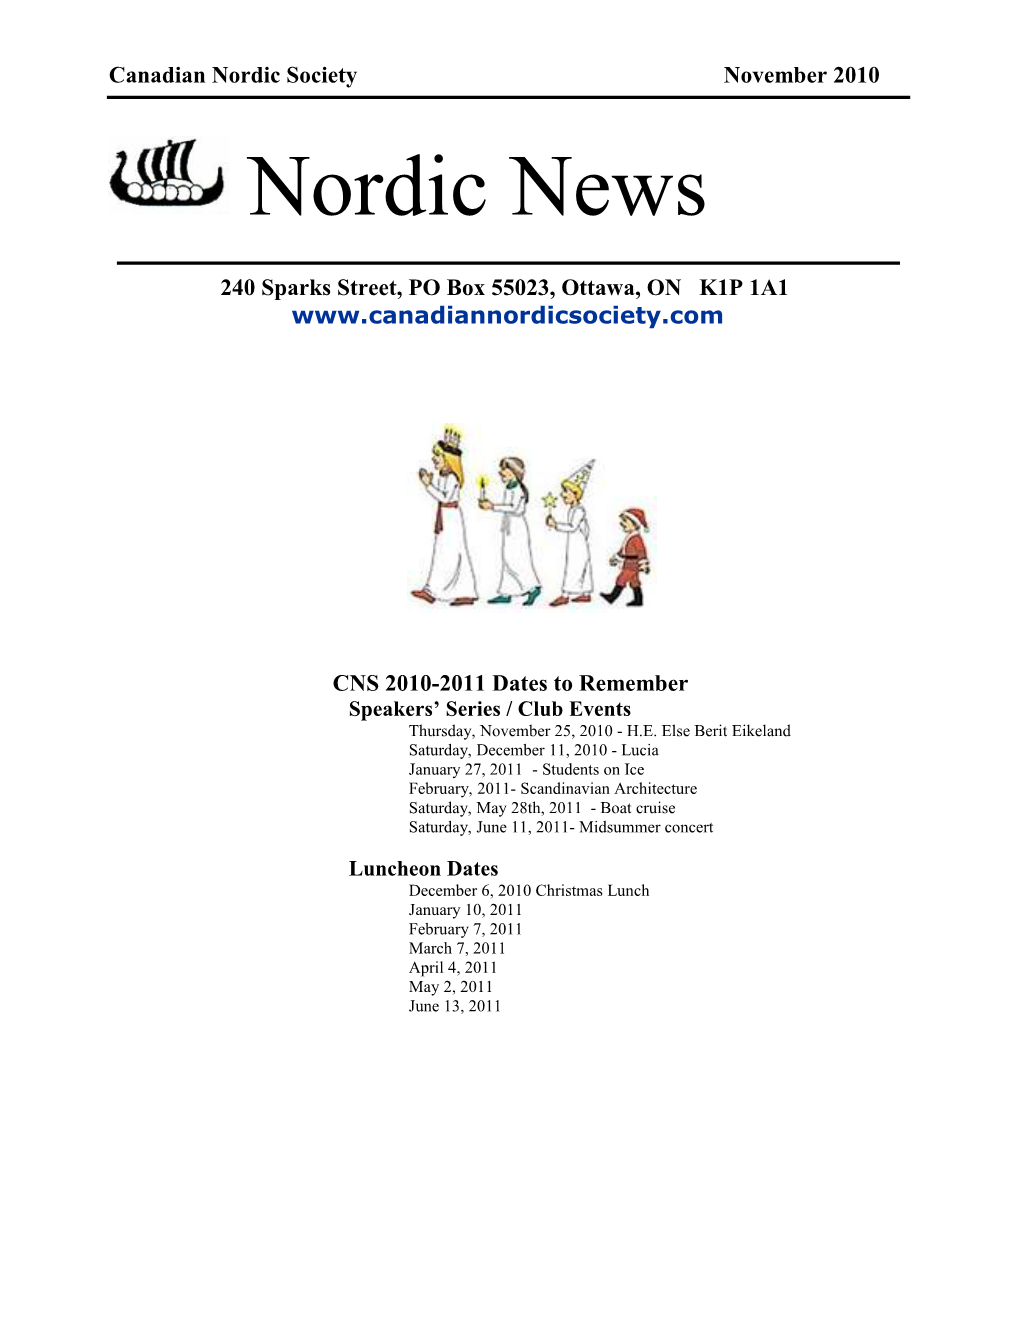 The Canadian Nordic Society